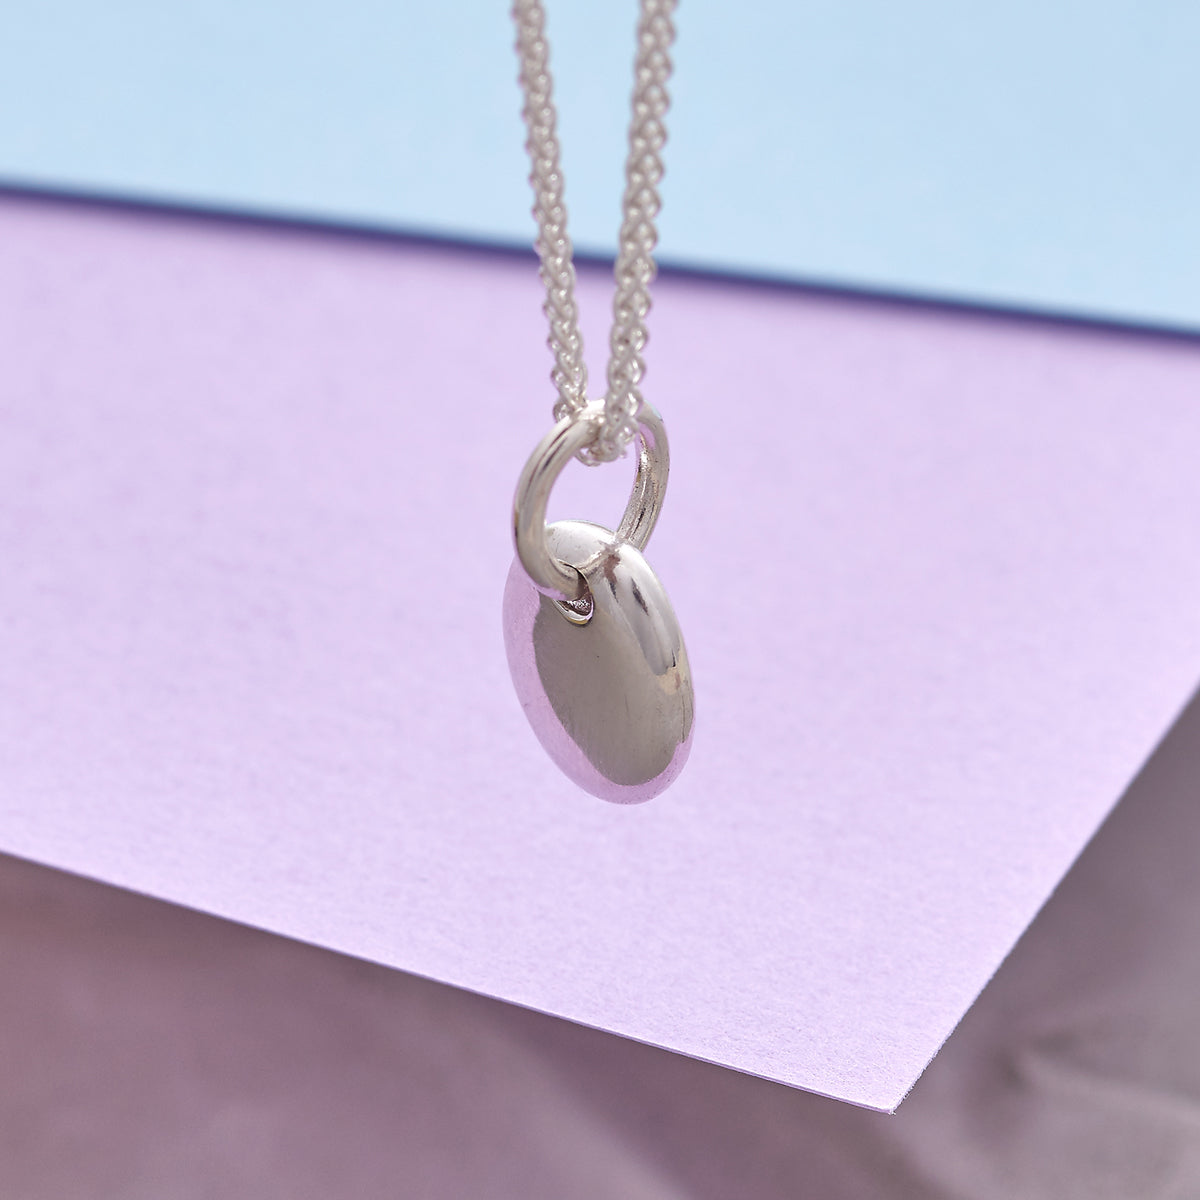 Pebble Personalised Initial Silver Charm Necklace FREE UK DELIVERY